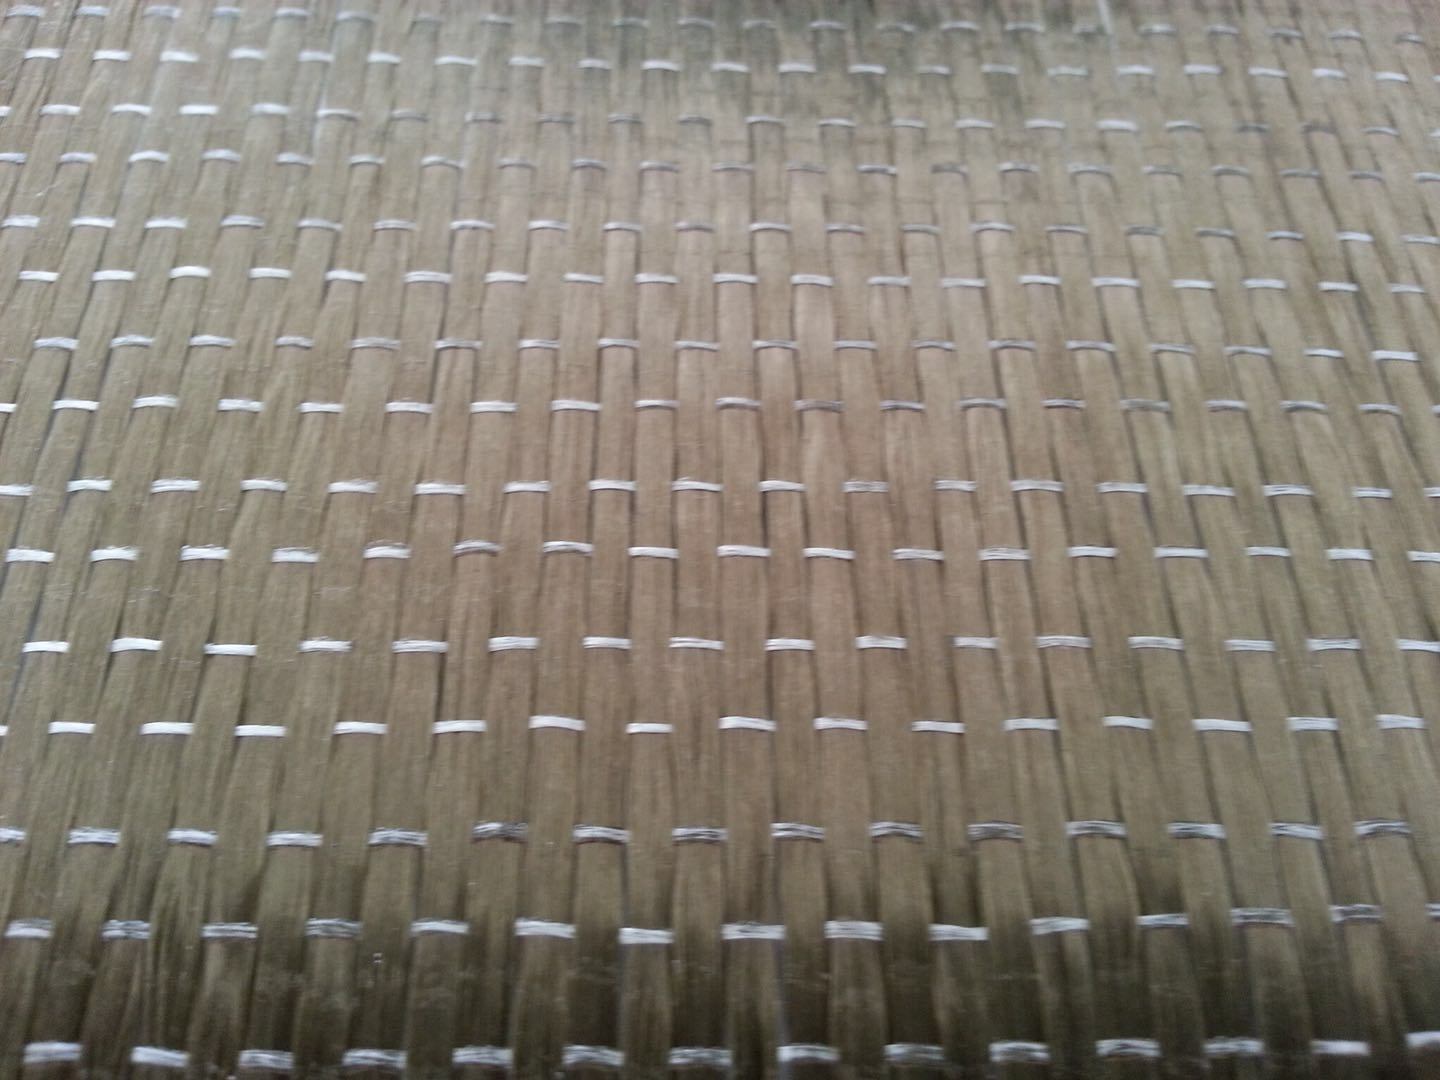 3K Twill/3K Plain Carbon Fabric High Quality for Aerospace Industry